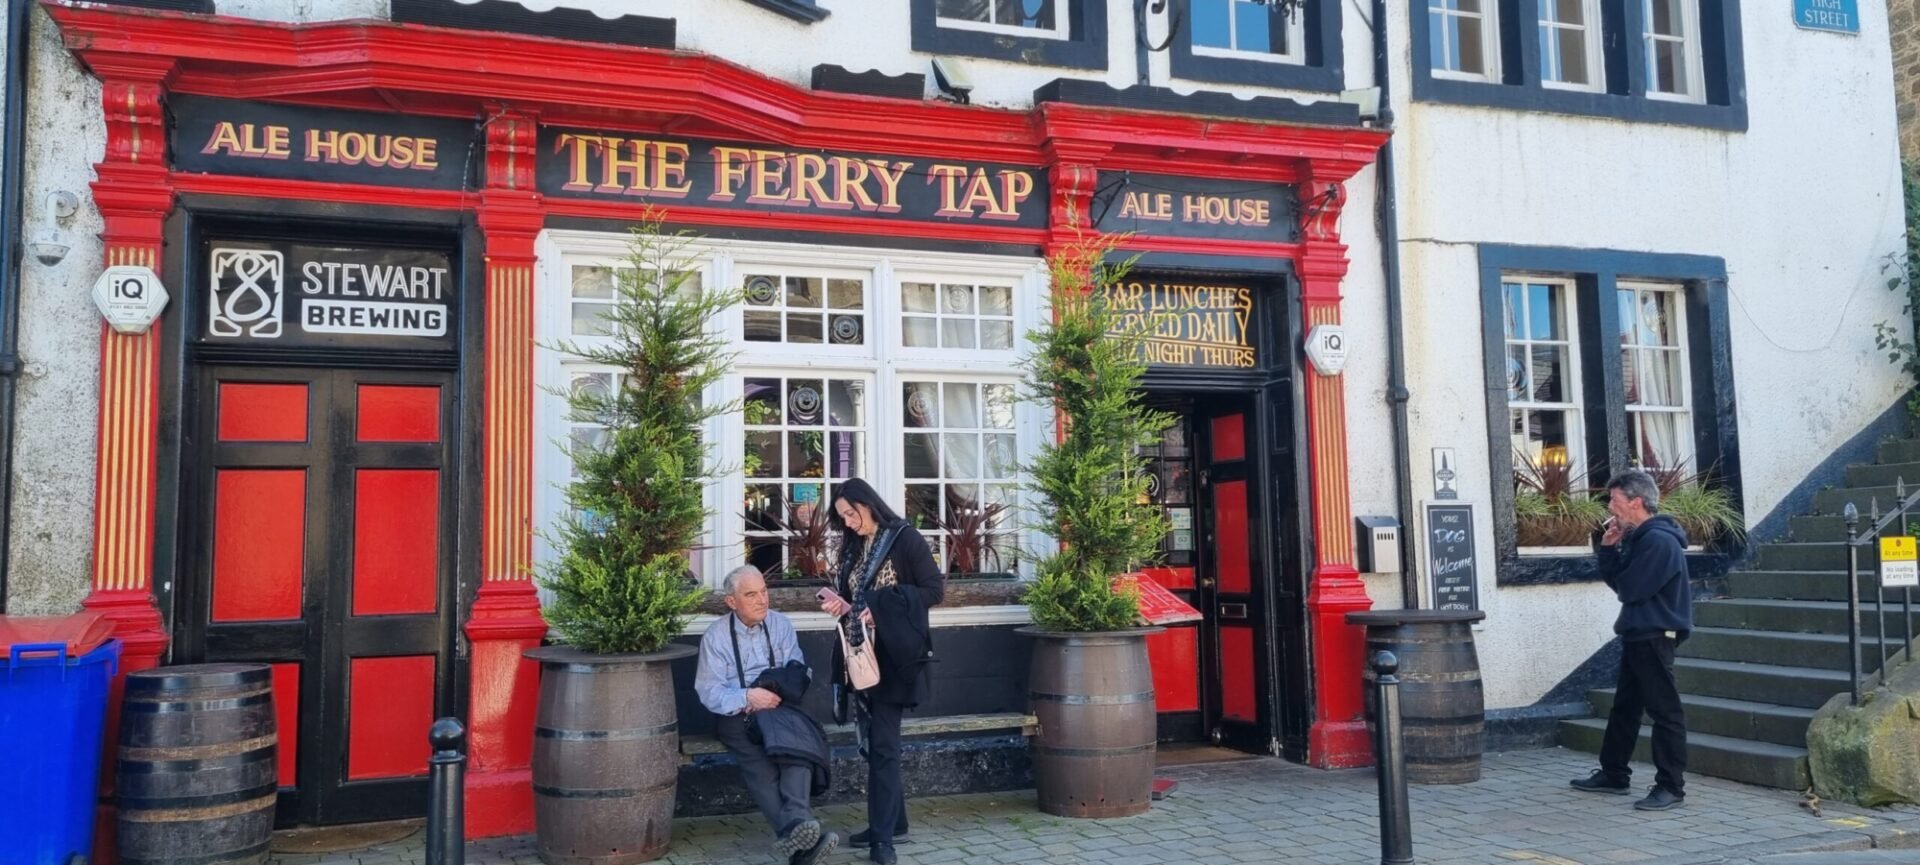 The Ferry Tap